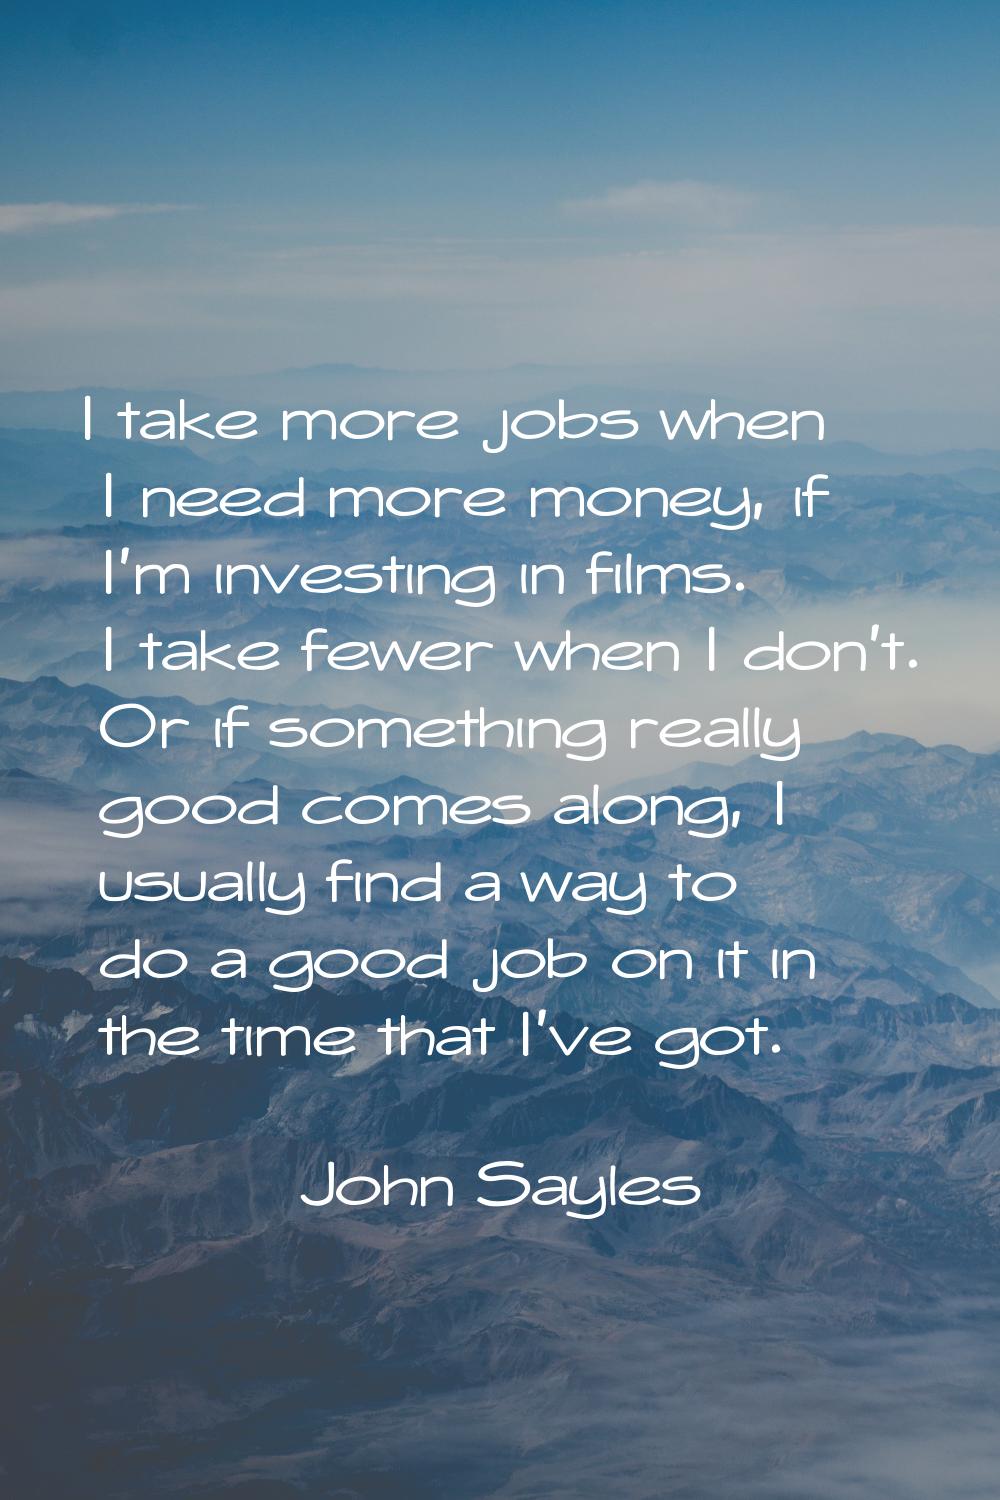 I take more jobs when I need more money, if I'm investing in films. I take fewer when I don't. Or i